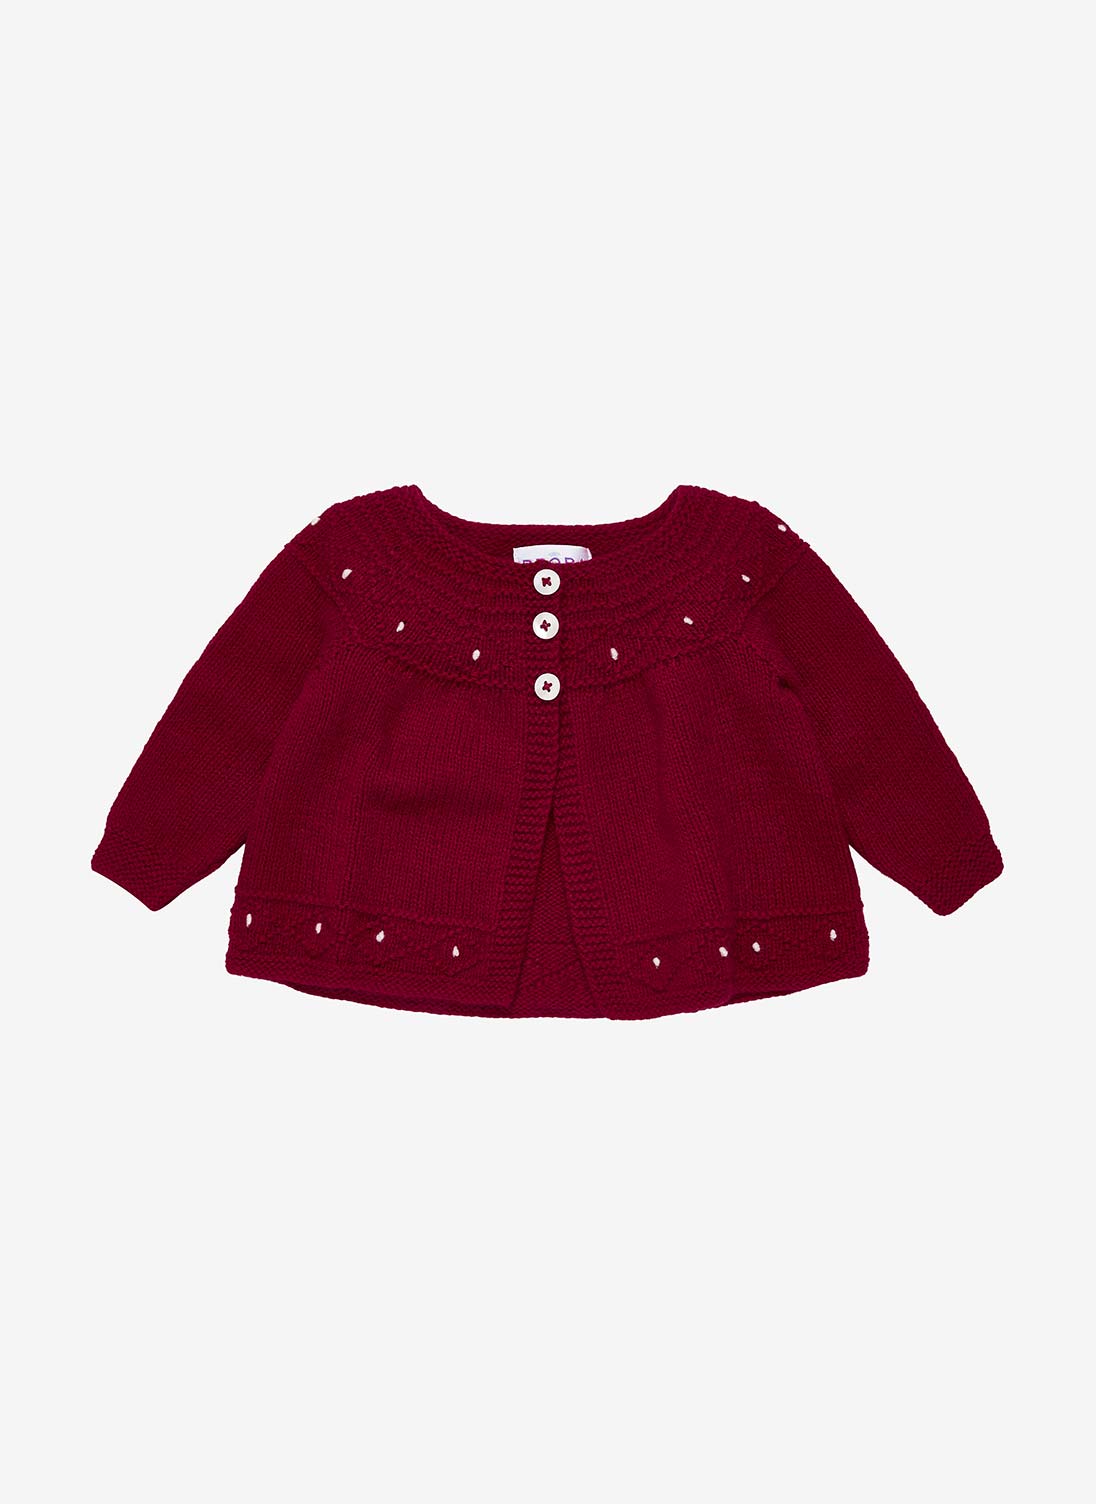 Cashmere Hand Knit Matinee Jacket Redcurrant